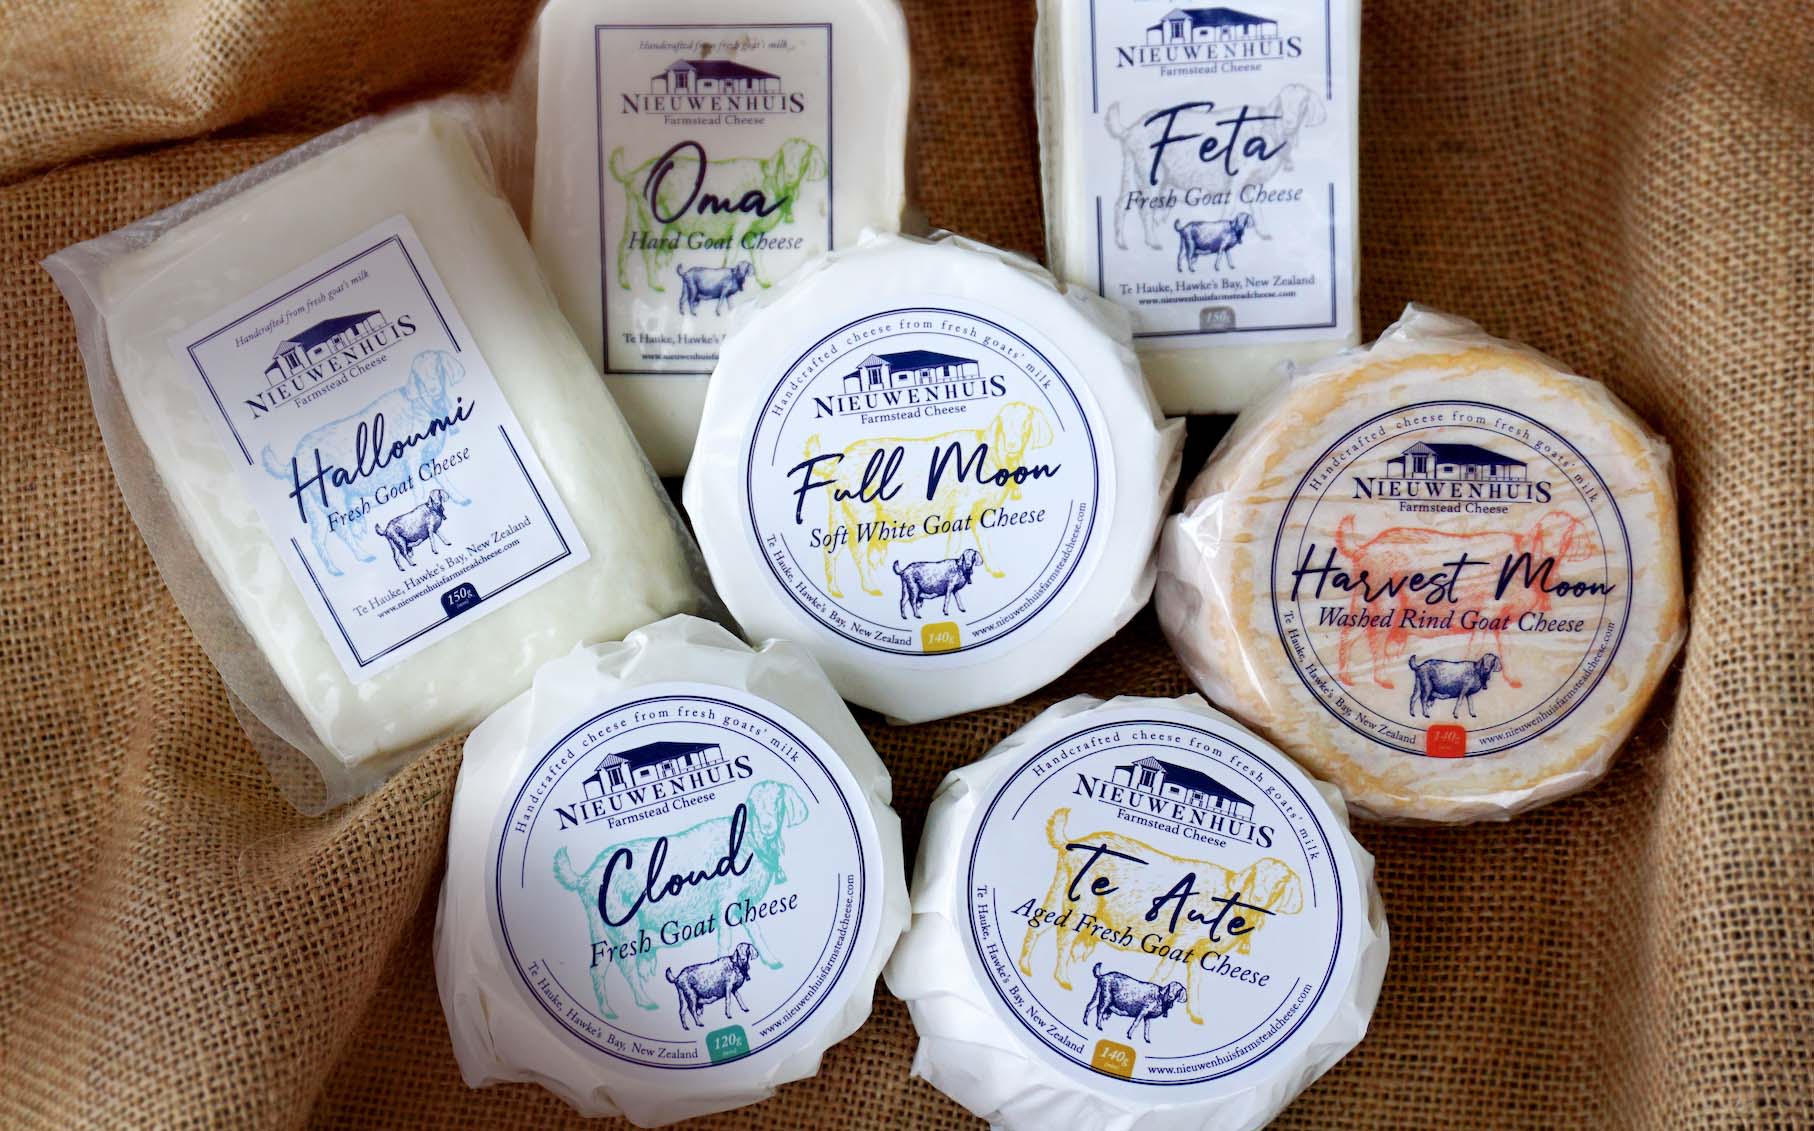 Nieuwenhuis cheese that is sold in stores